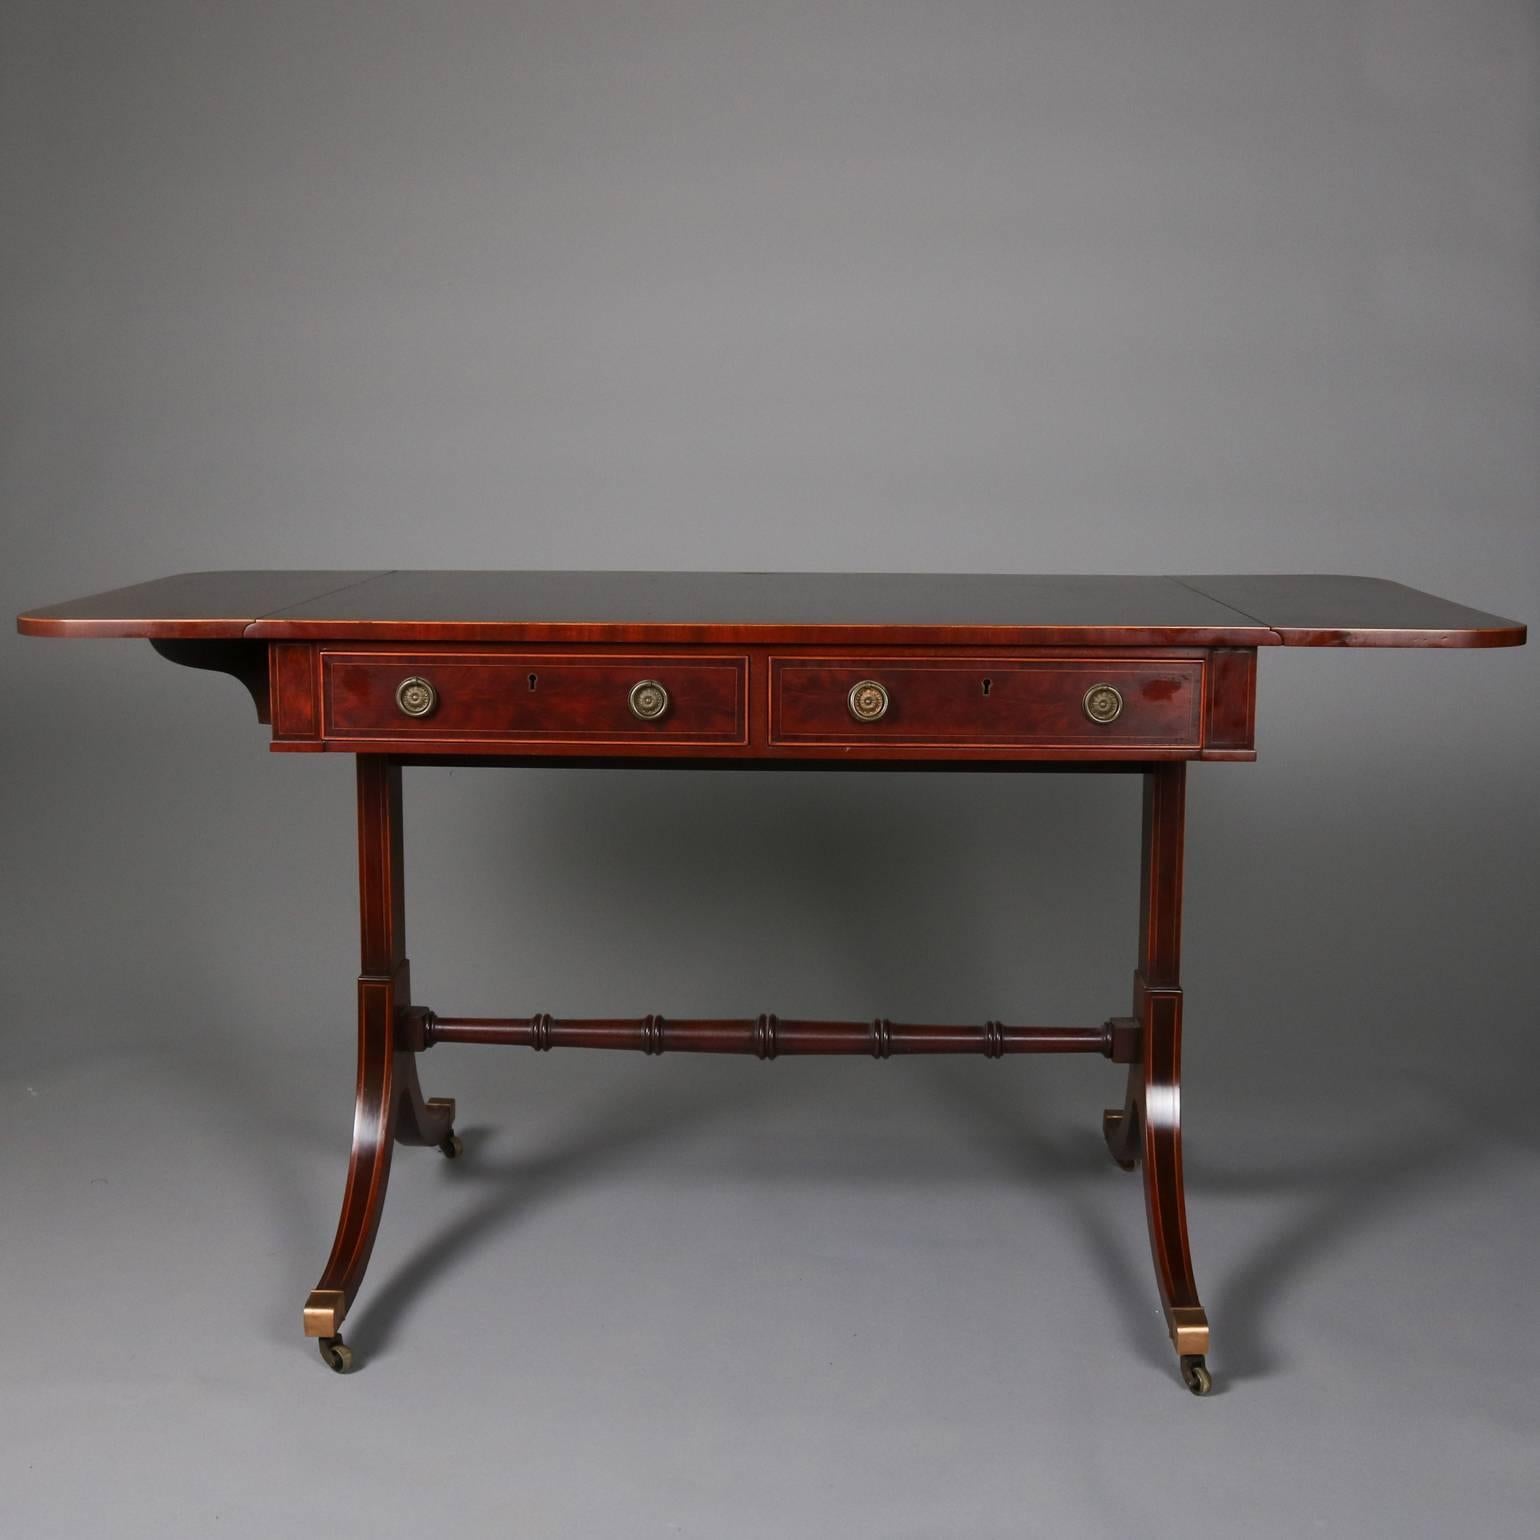 Antique English flame mahogany Duncan Phyfe school drop-leaf trestle server features two locking drawers with satinwood inlaid banding, splay legs connected with turned stretchers bronze caps and casters, en verso faux drawers, key included, 19th